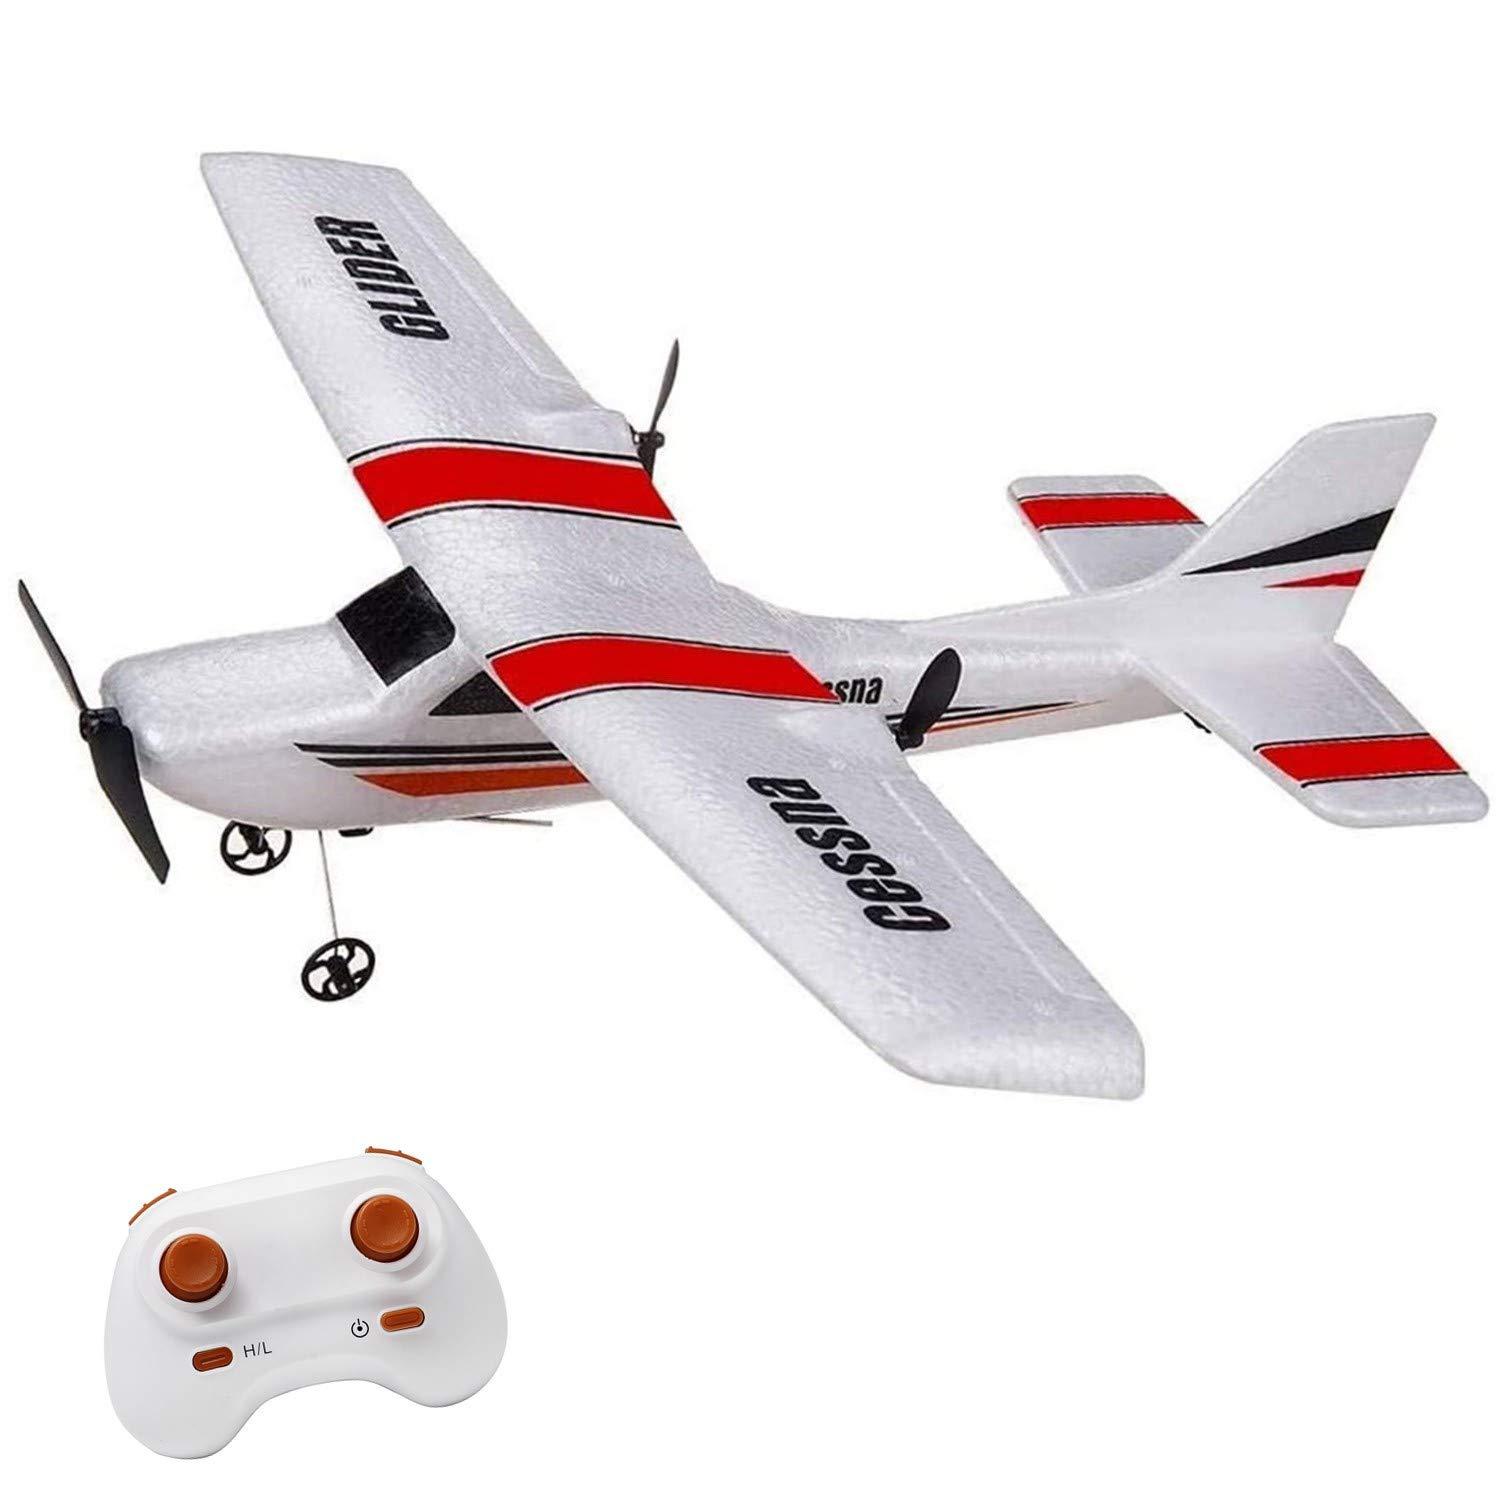 Rc Plane 2 Channel: Ideal for Beginning RC Enthusiasts: The Affordable and Durable RC Plane 2 Channel